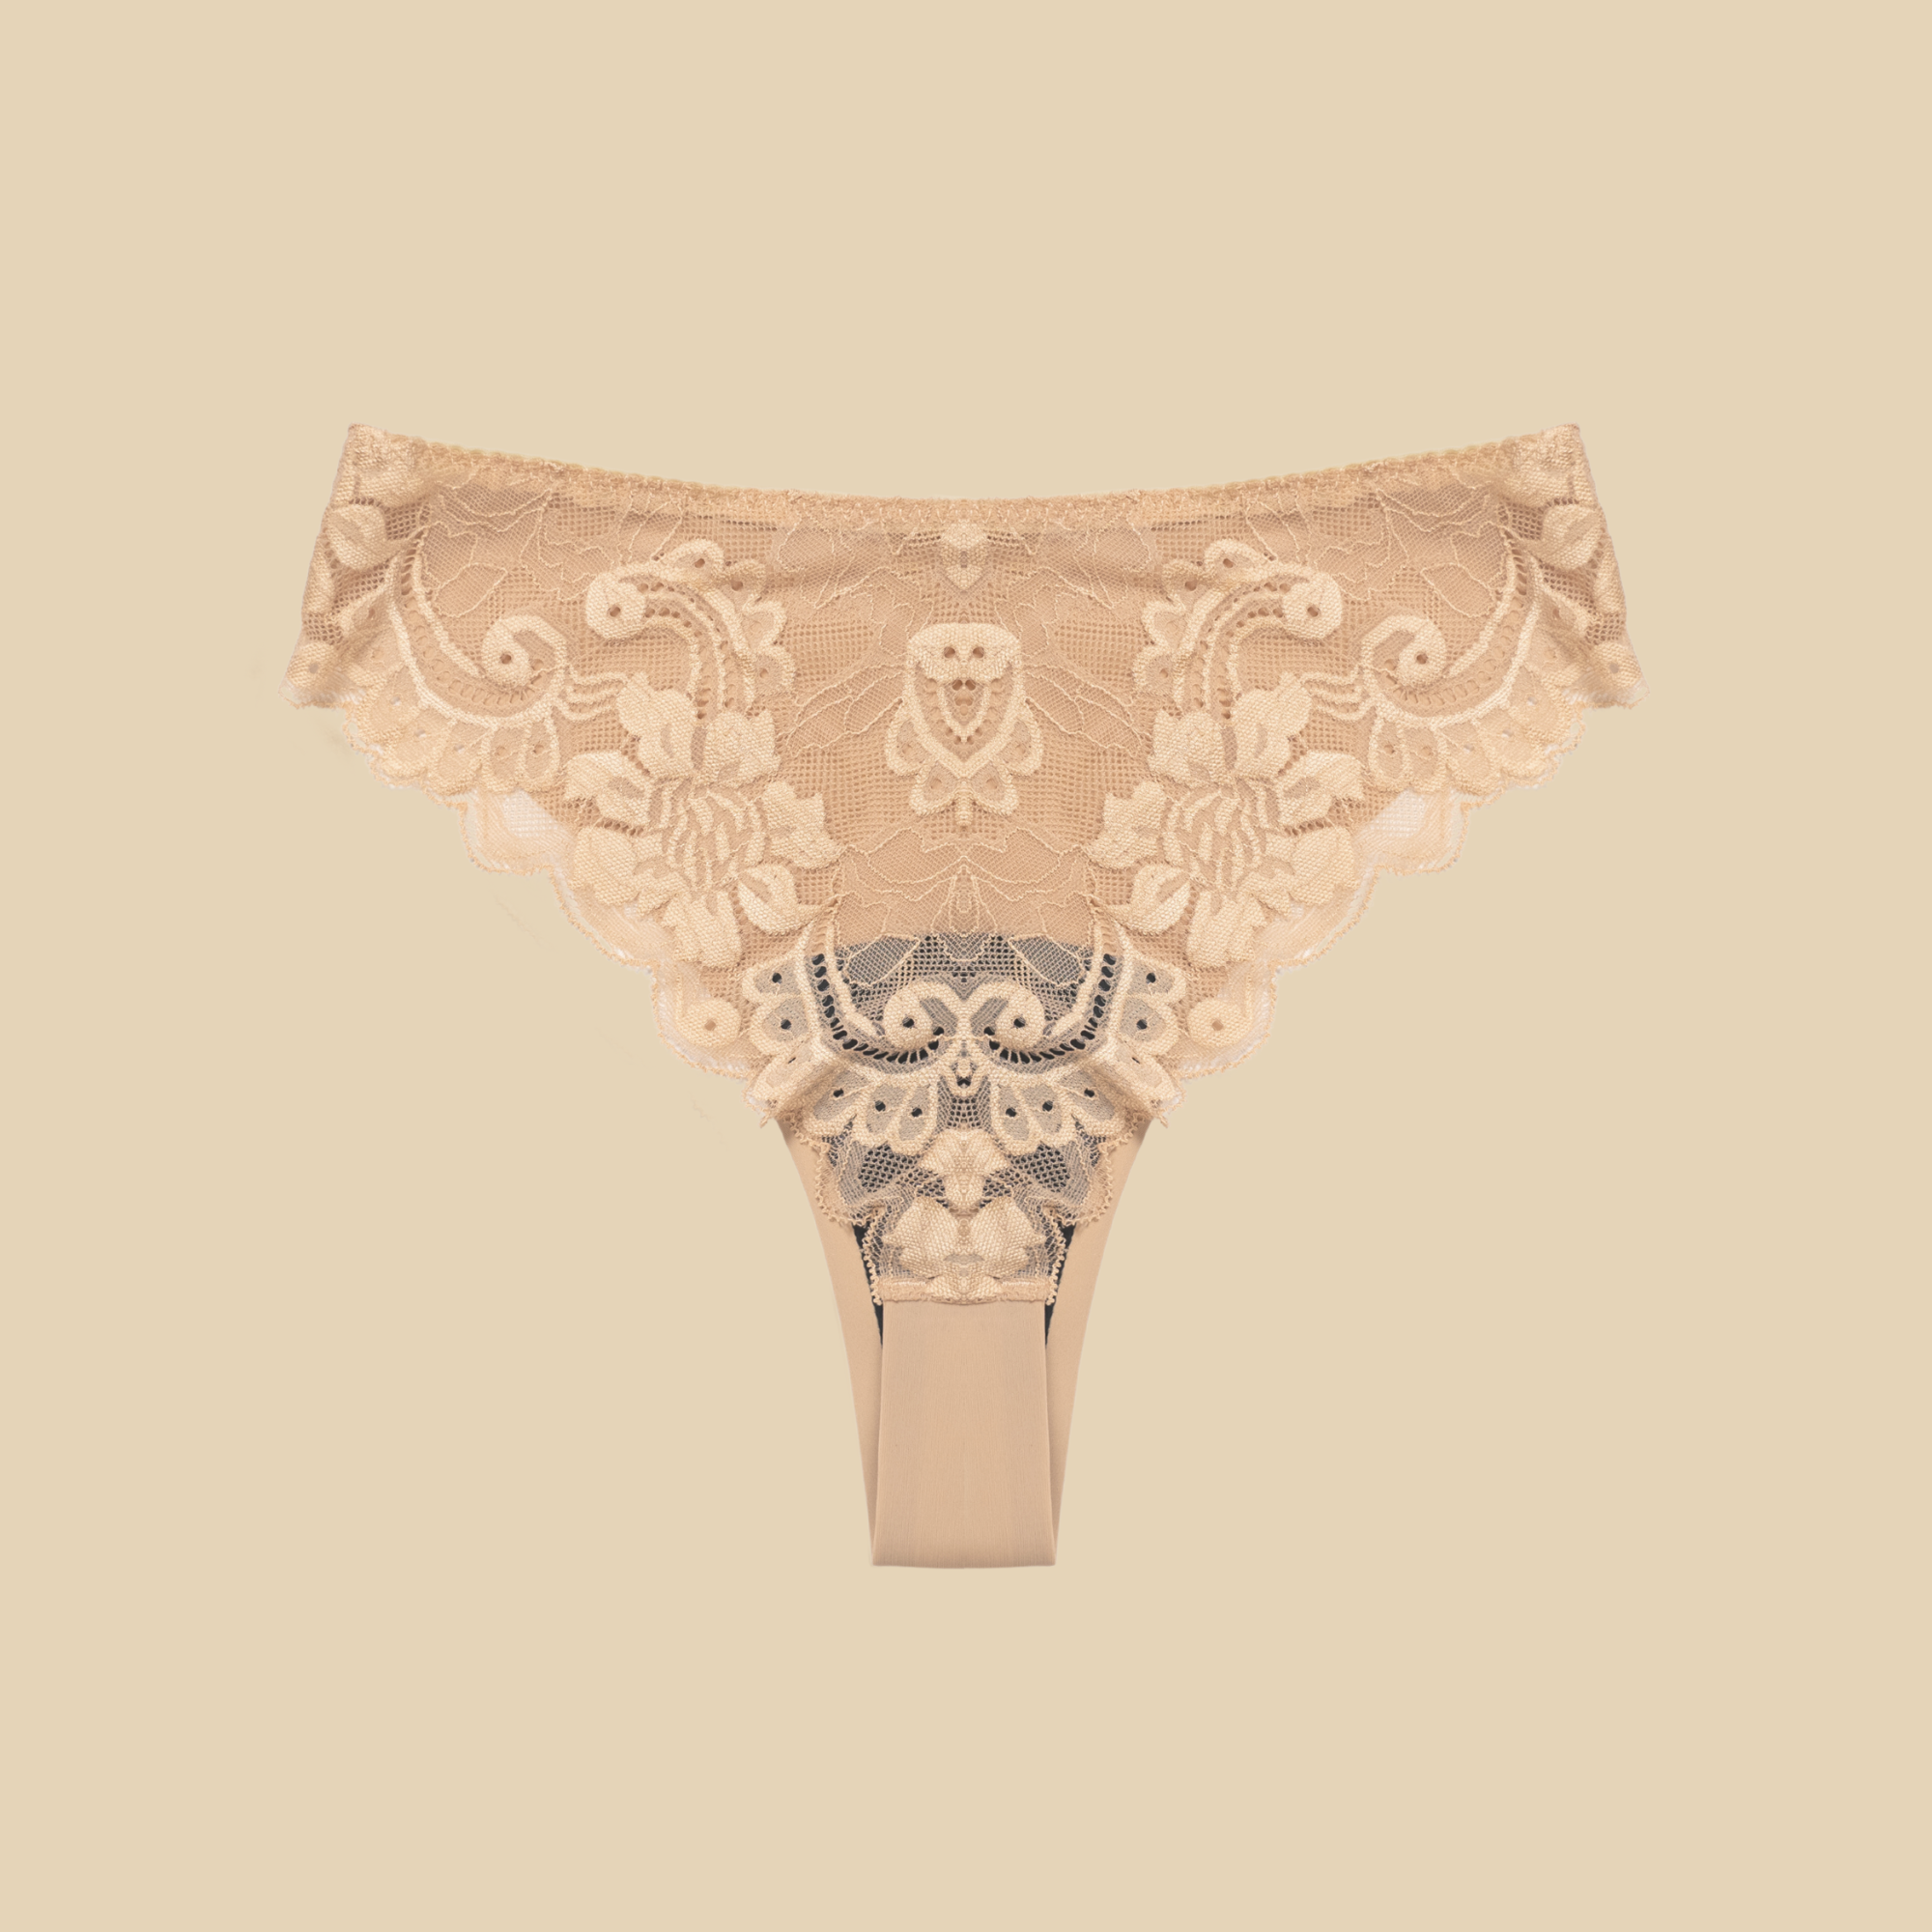 dais daily underwear in brazilian cut with lace in beige colour. Product shown on model from the back.